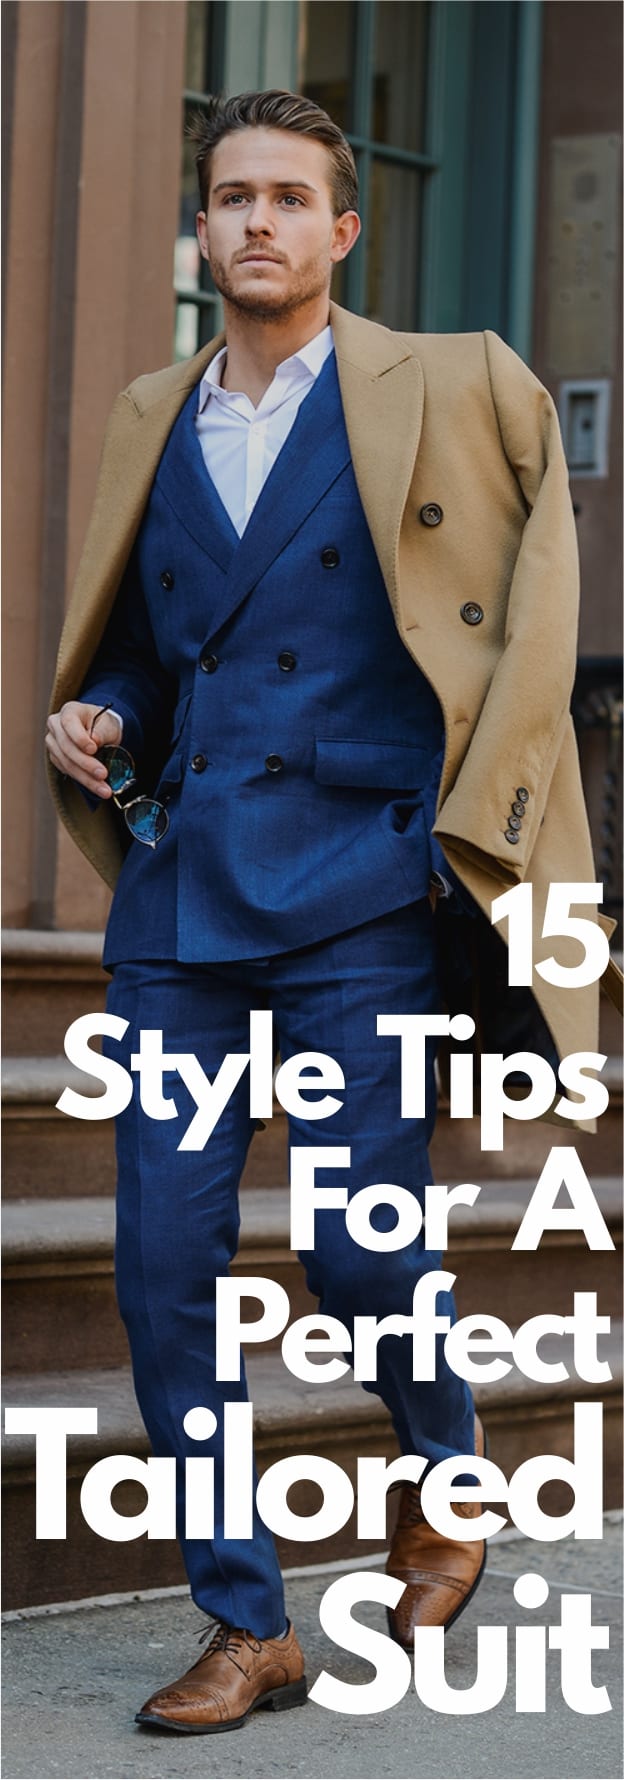 15 Style Tips For A Tailored Suit